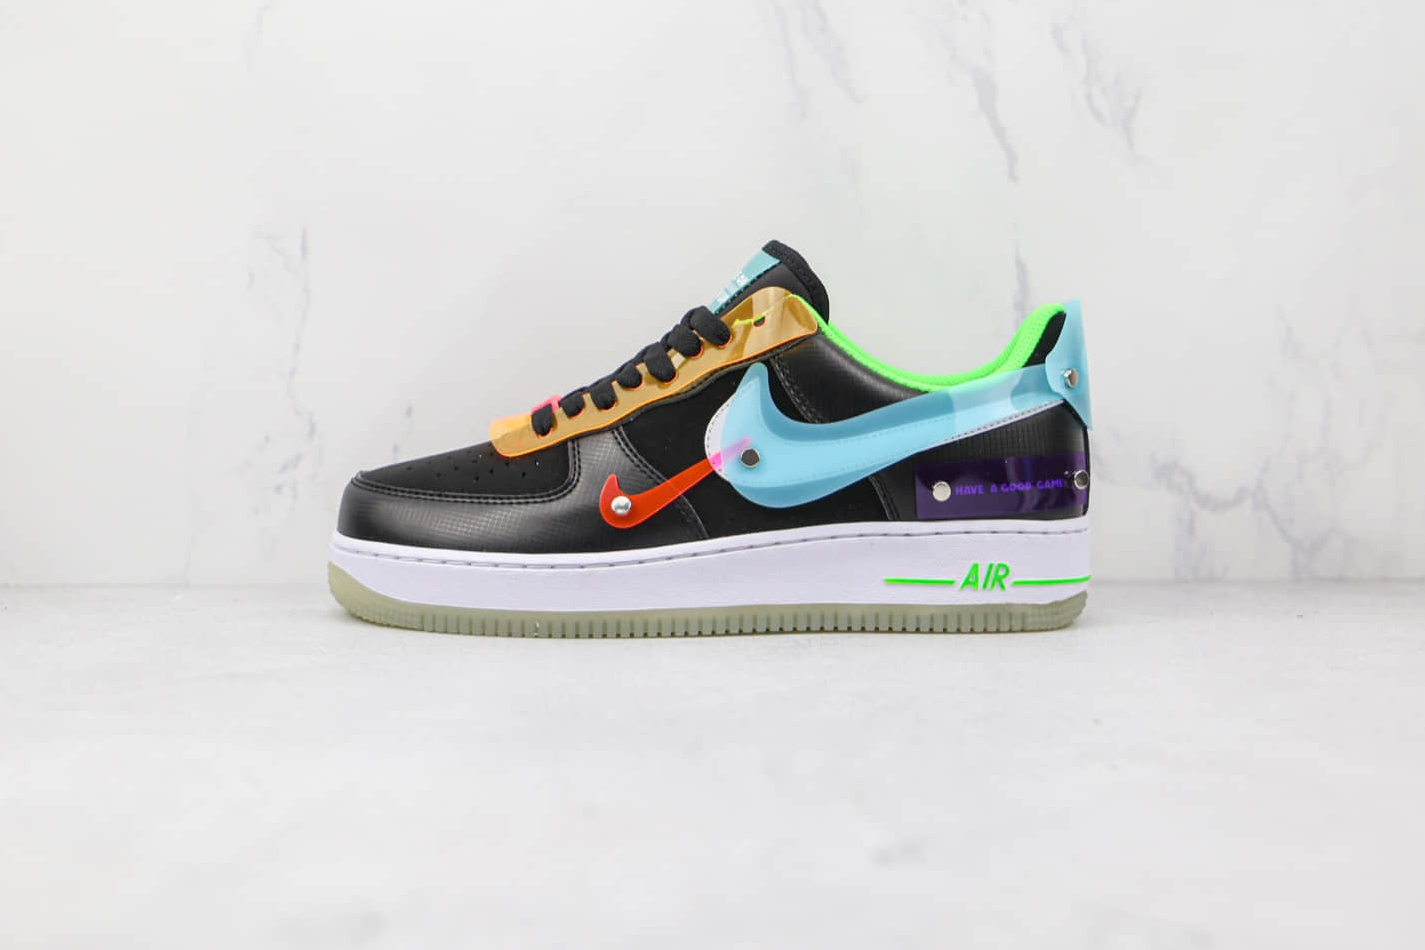 Nike Air Force 1 07 LV8 'Have a Good Game' DO7085-011 - Shop Now!